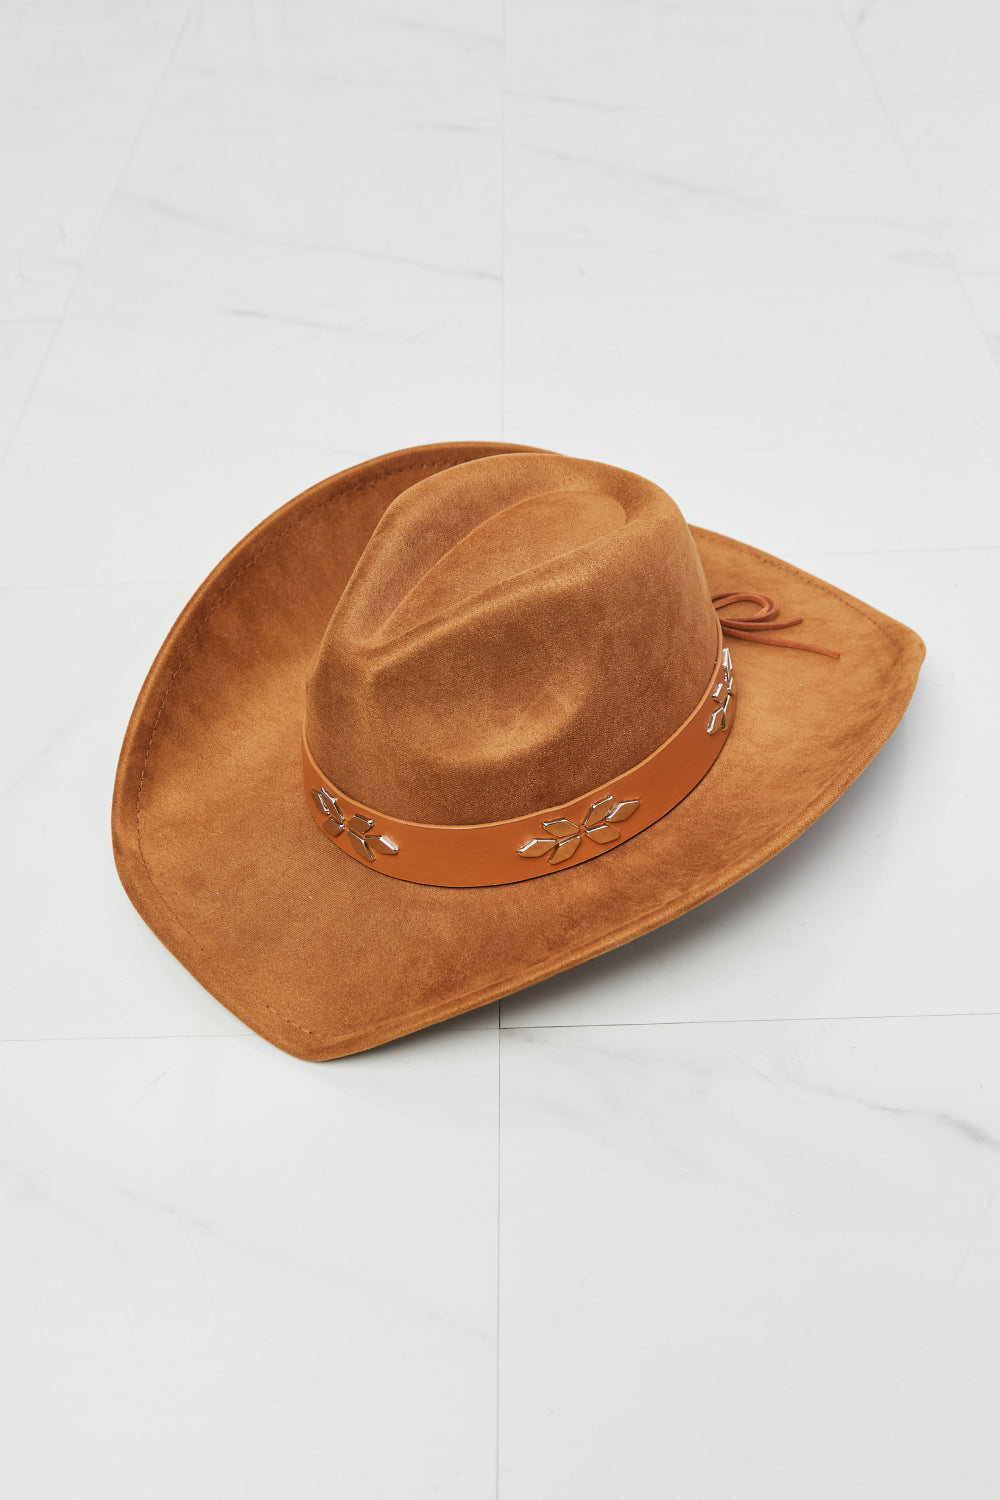 The Classic Suede Cowboy Hat